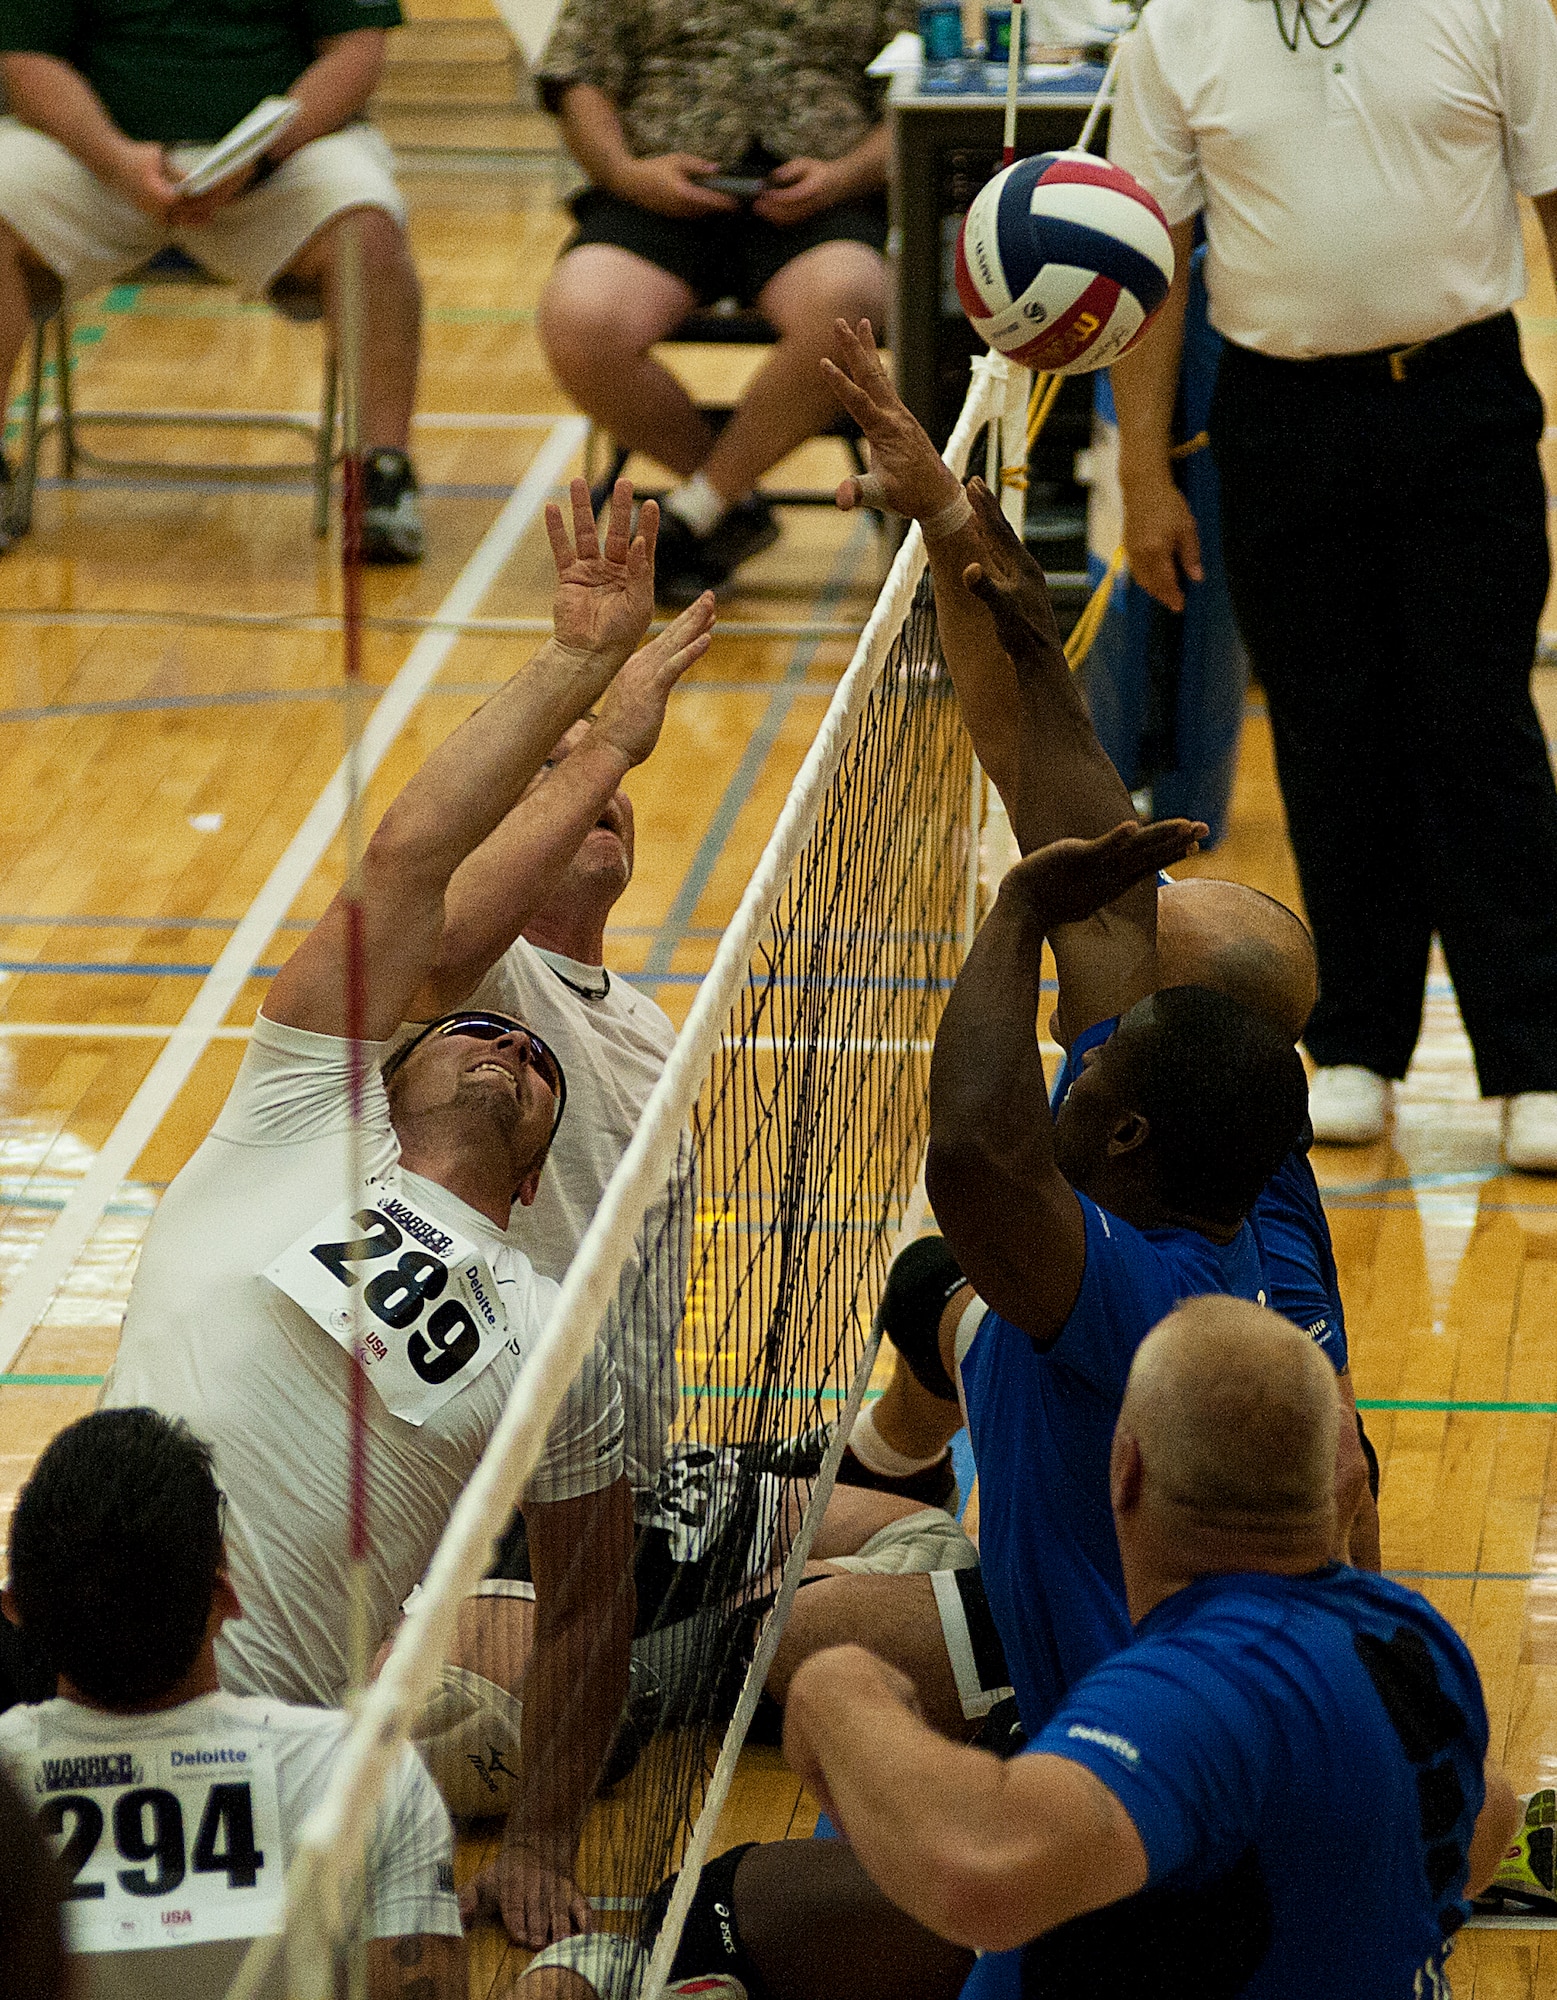 Members of the Air Force and Special Operations Command sitting volleyball teams battle for the bronze medal during the 2012 Warrior Games at the U.S. Air Force Academy in Colorado Springs, Colo., May 3, 2012. Air Force won by a score of 25-12 and 25-20. (U.S. Air Force photo/Val Gempis)